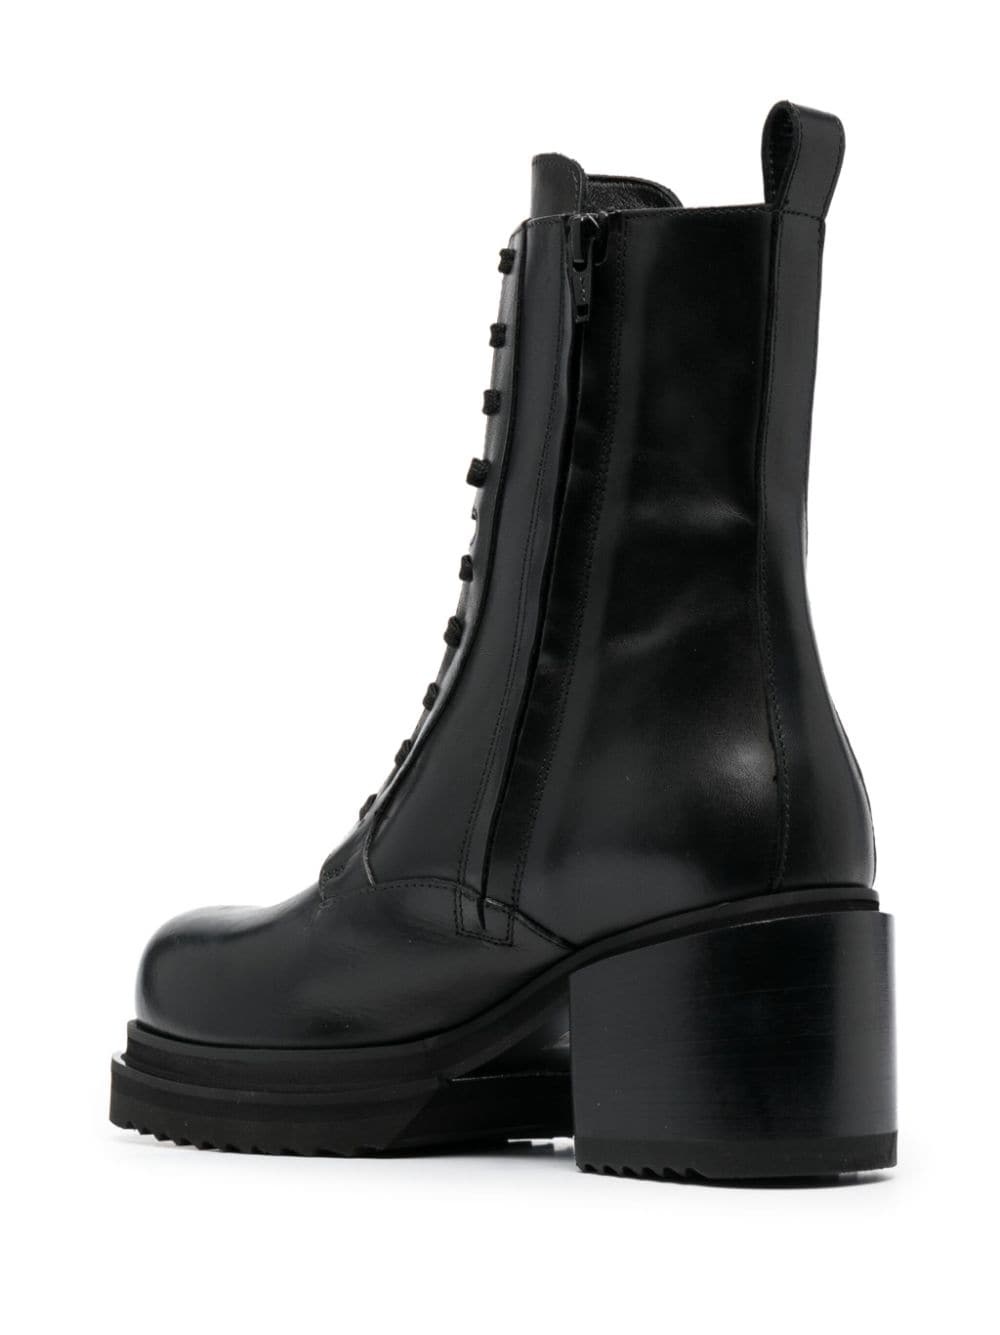 70mm leather combat boots - 3